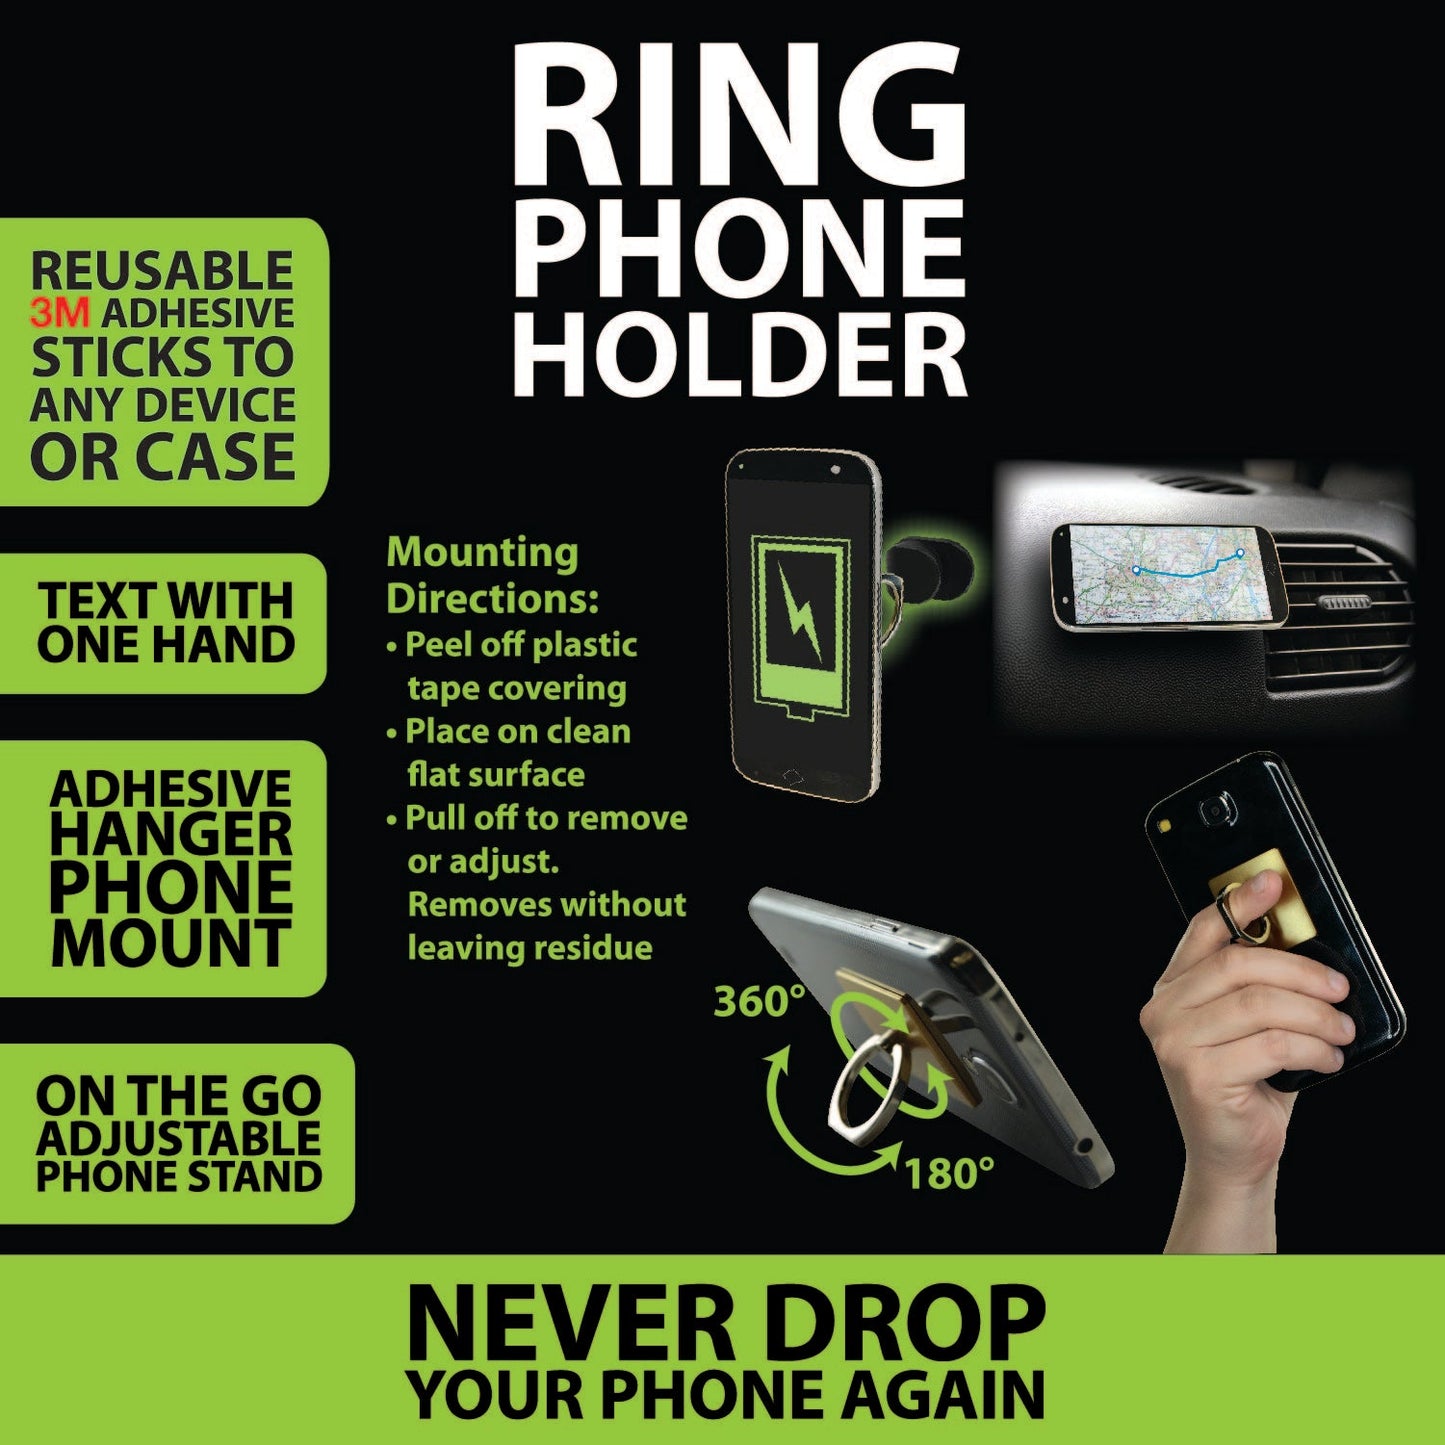 ITEM NUMBER 022442 GG PHONE RING 4 PIECES PER PACK